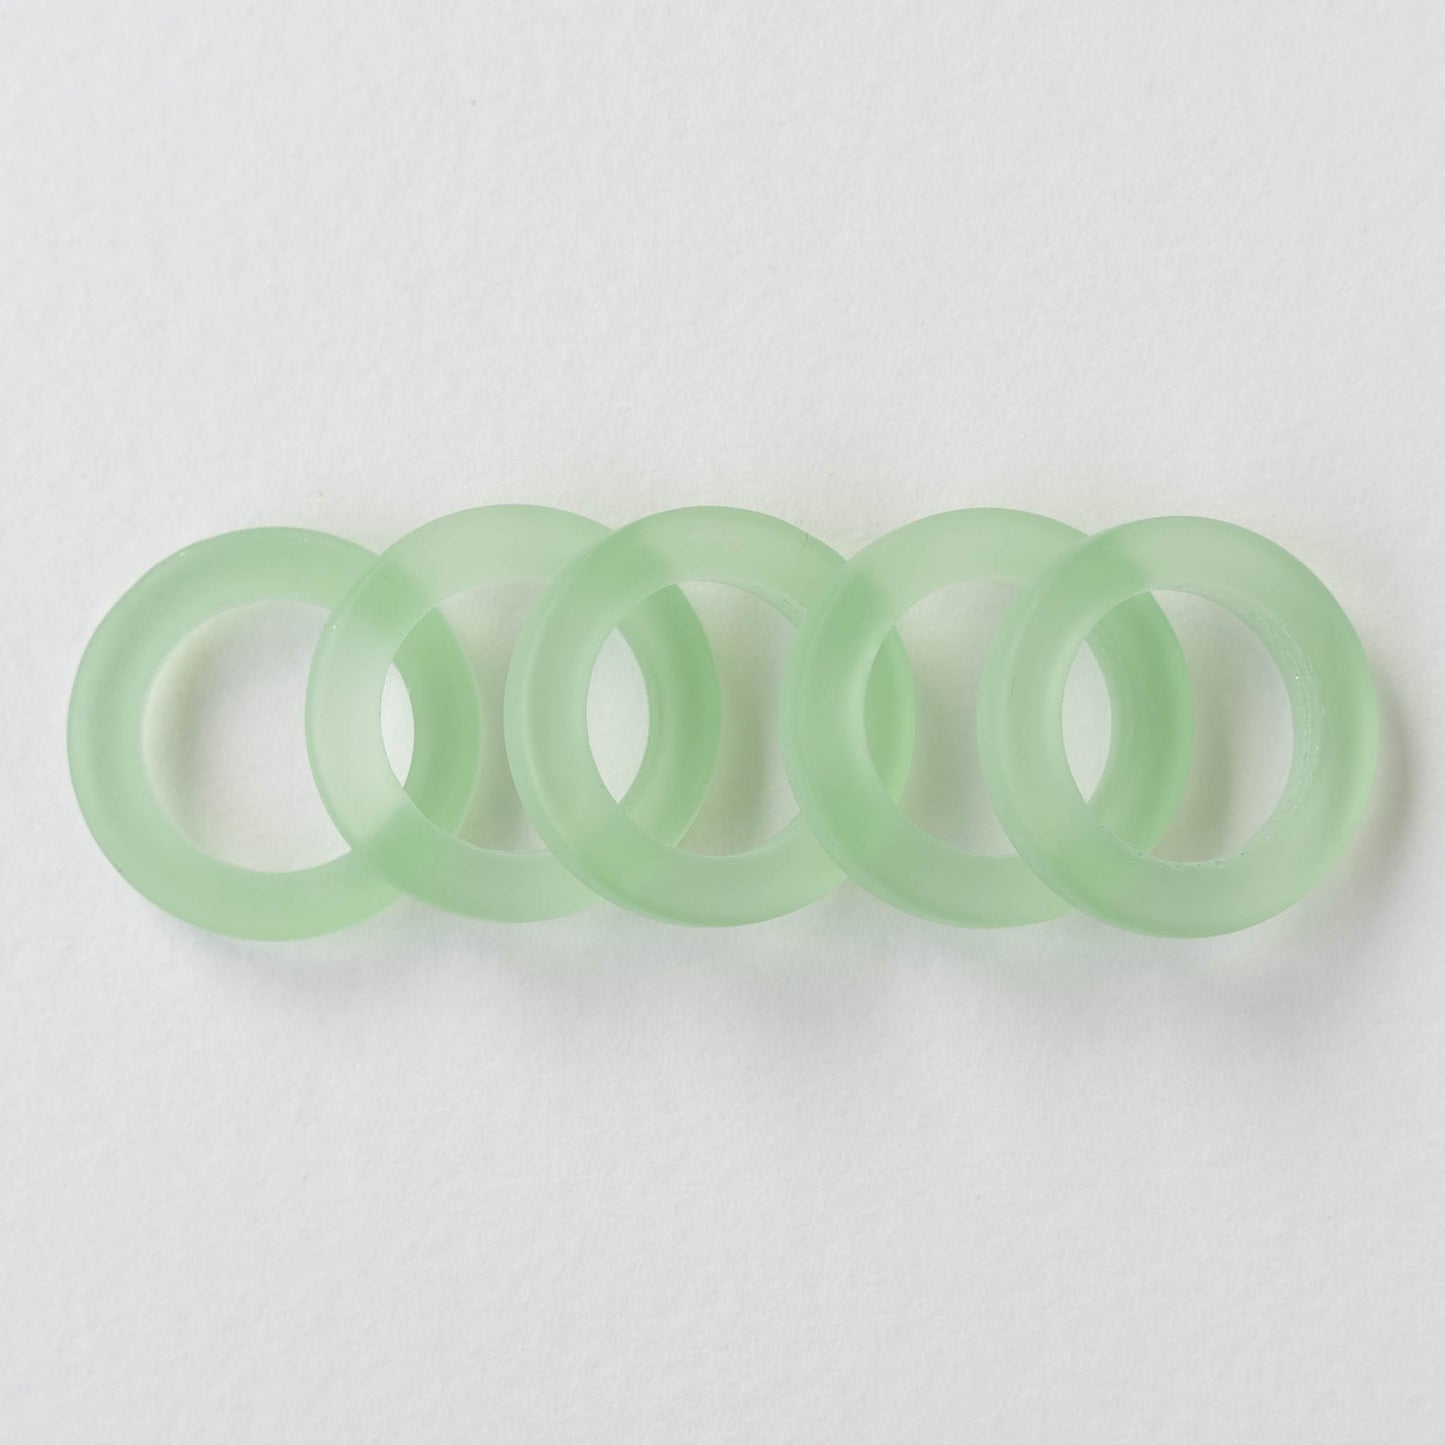 27mm Frosted Glass Rings - Light Green - 2 Rings